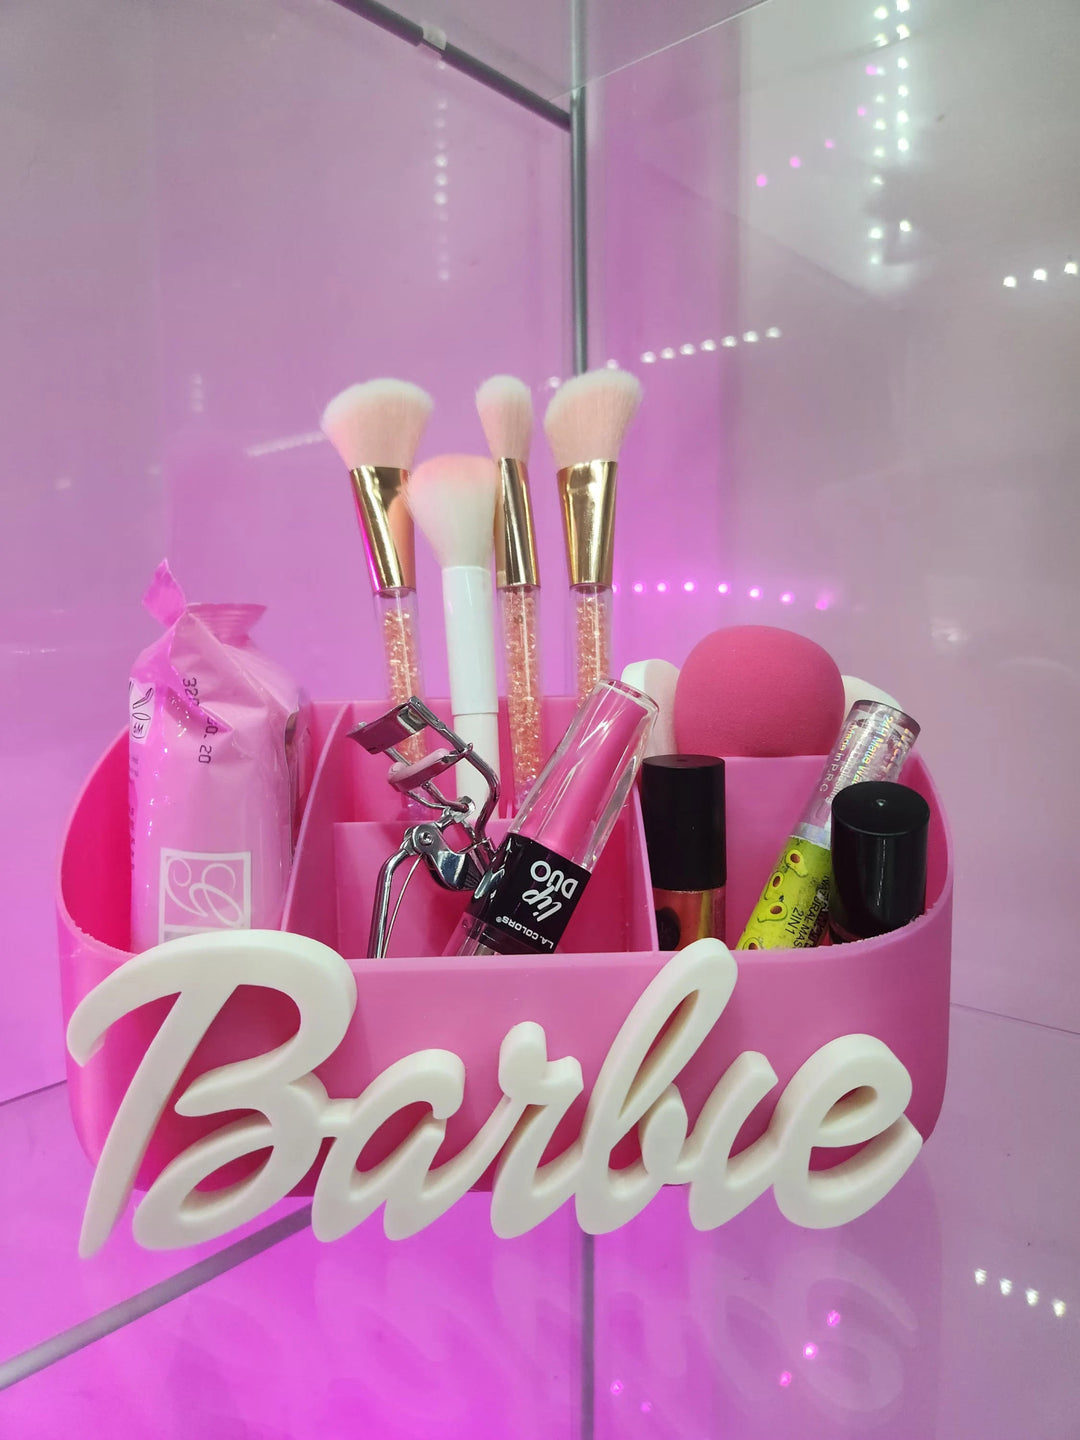 3D Printed Multicolor Barbie Style Logo or Your Name! Makeup Accessories Holder 8"x5"x4 - JDColFashion